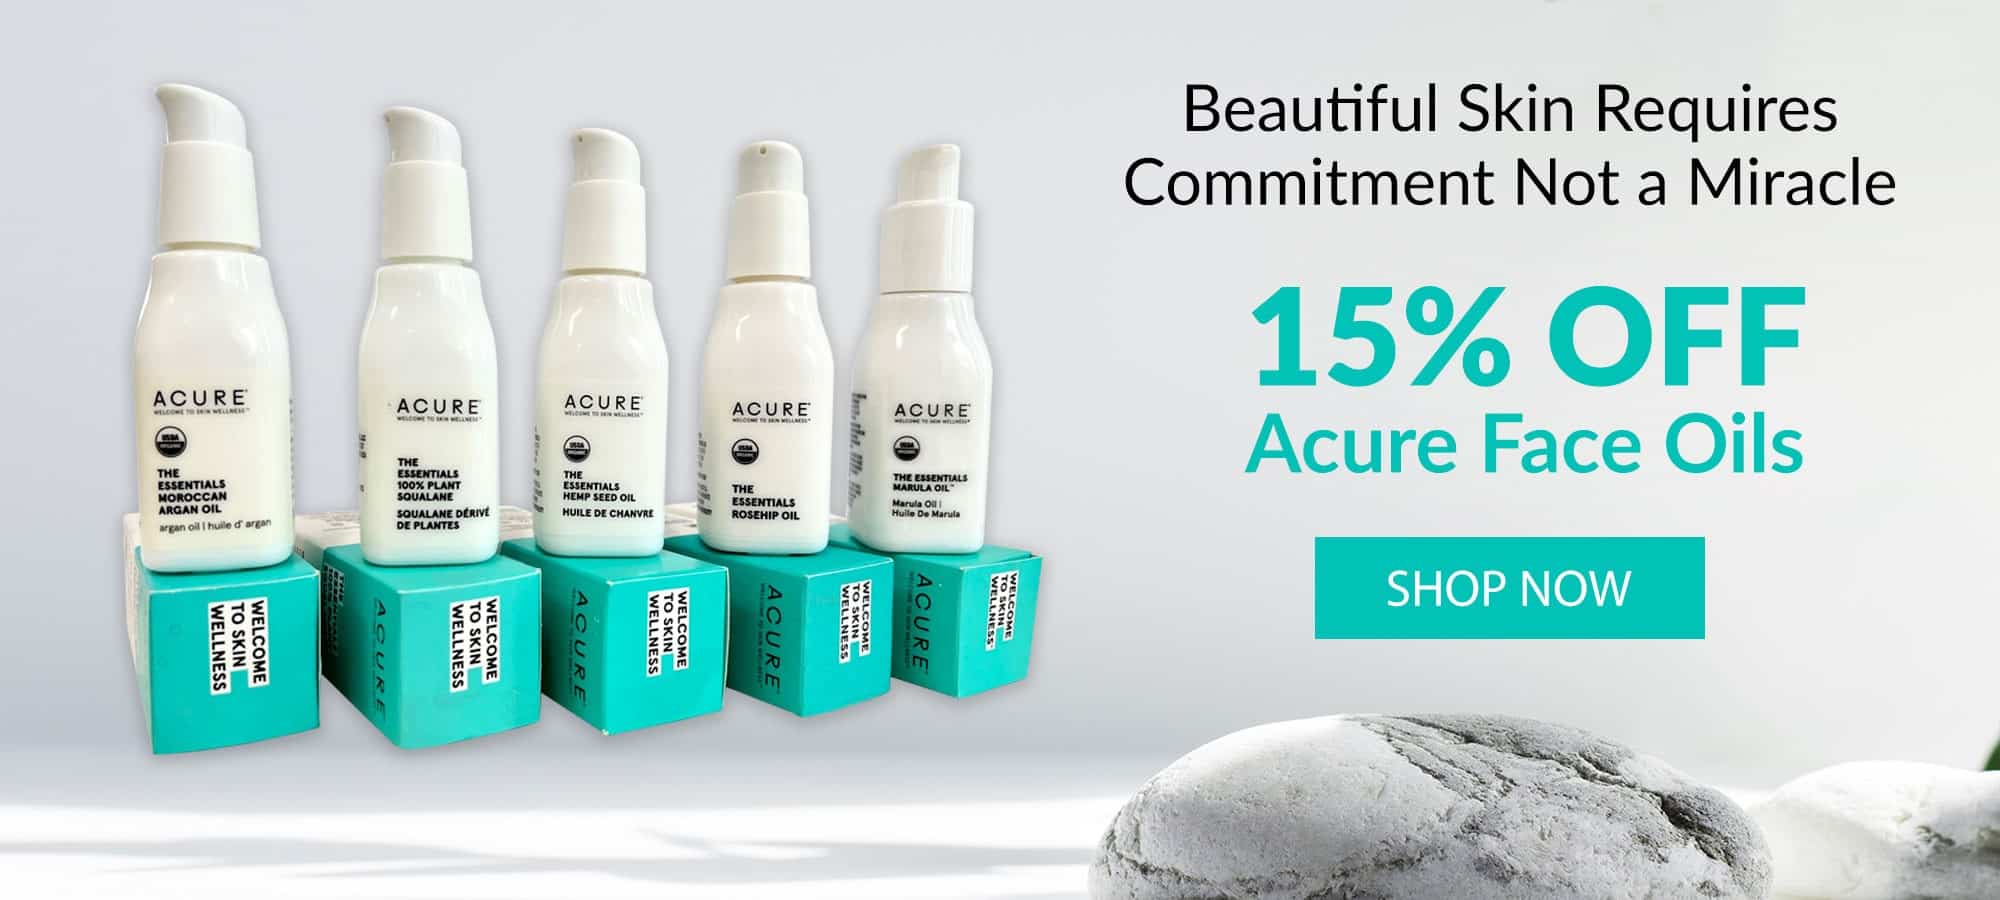 Acure face oils 15% off